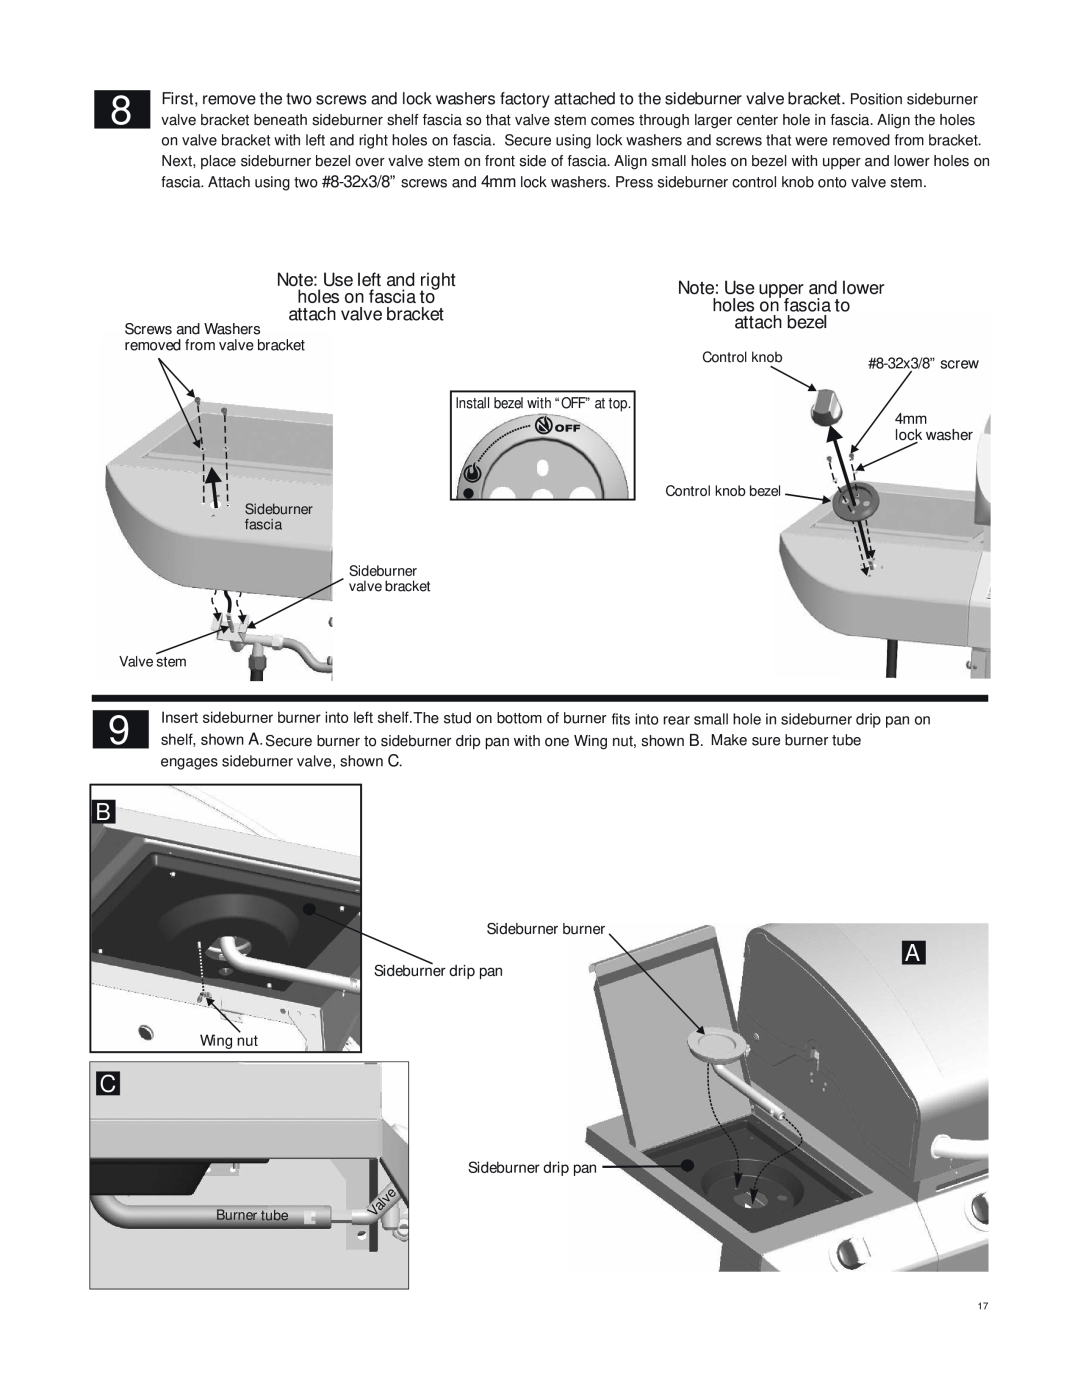 Char-Broil 463247412 manual Note Use left and right holes on fascia to attach valve bracket 